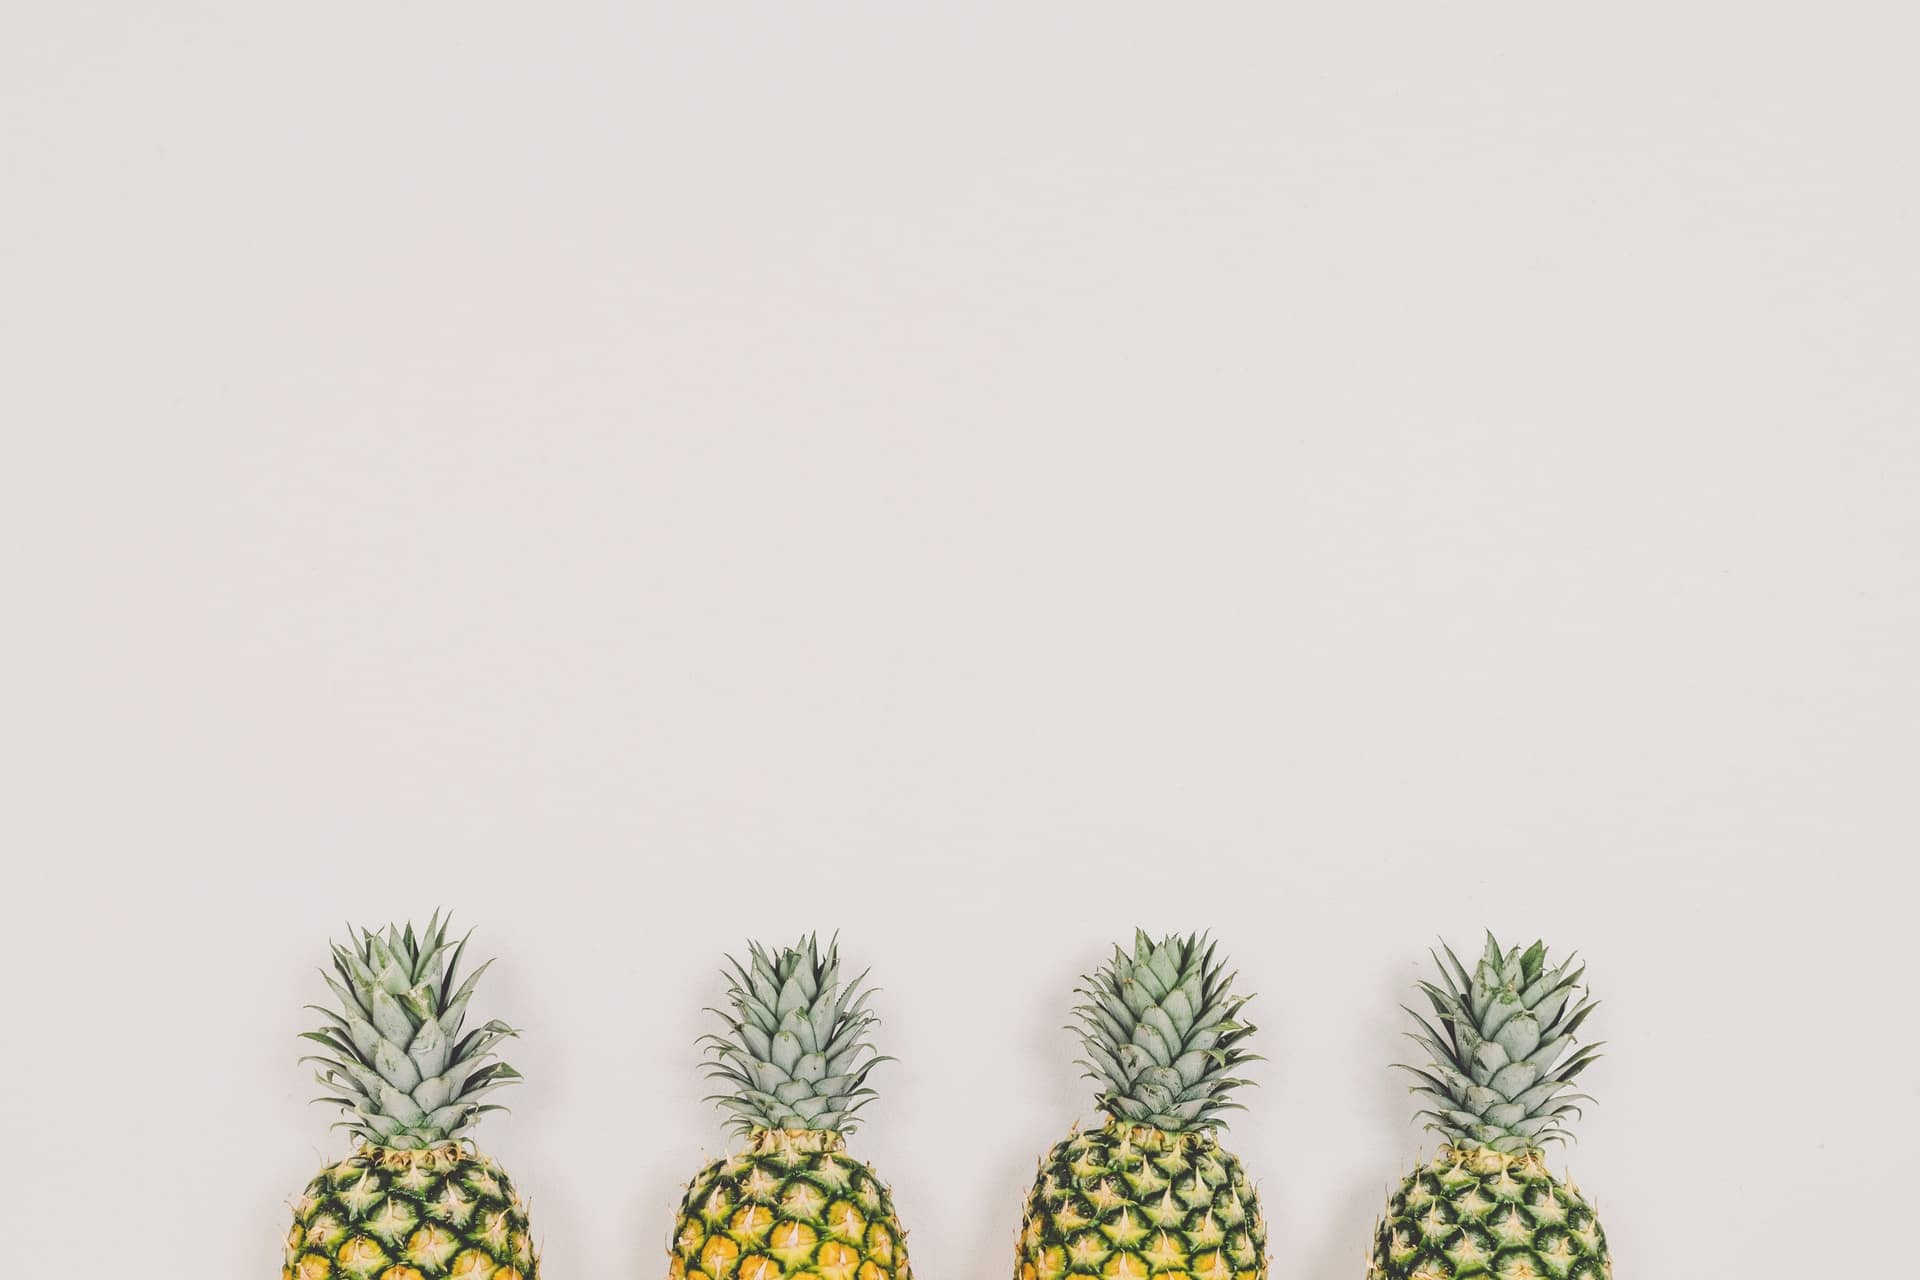 four pineapples